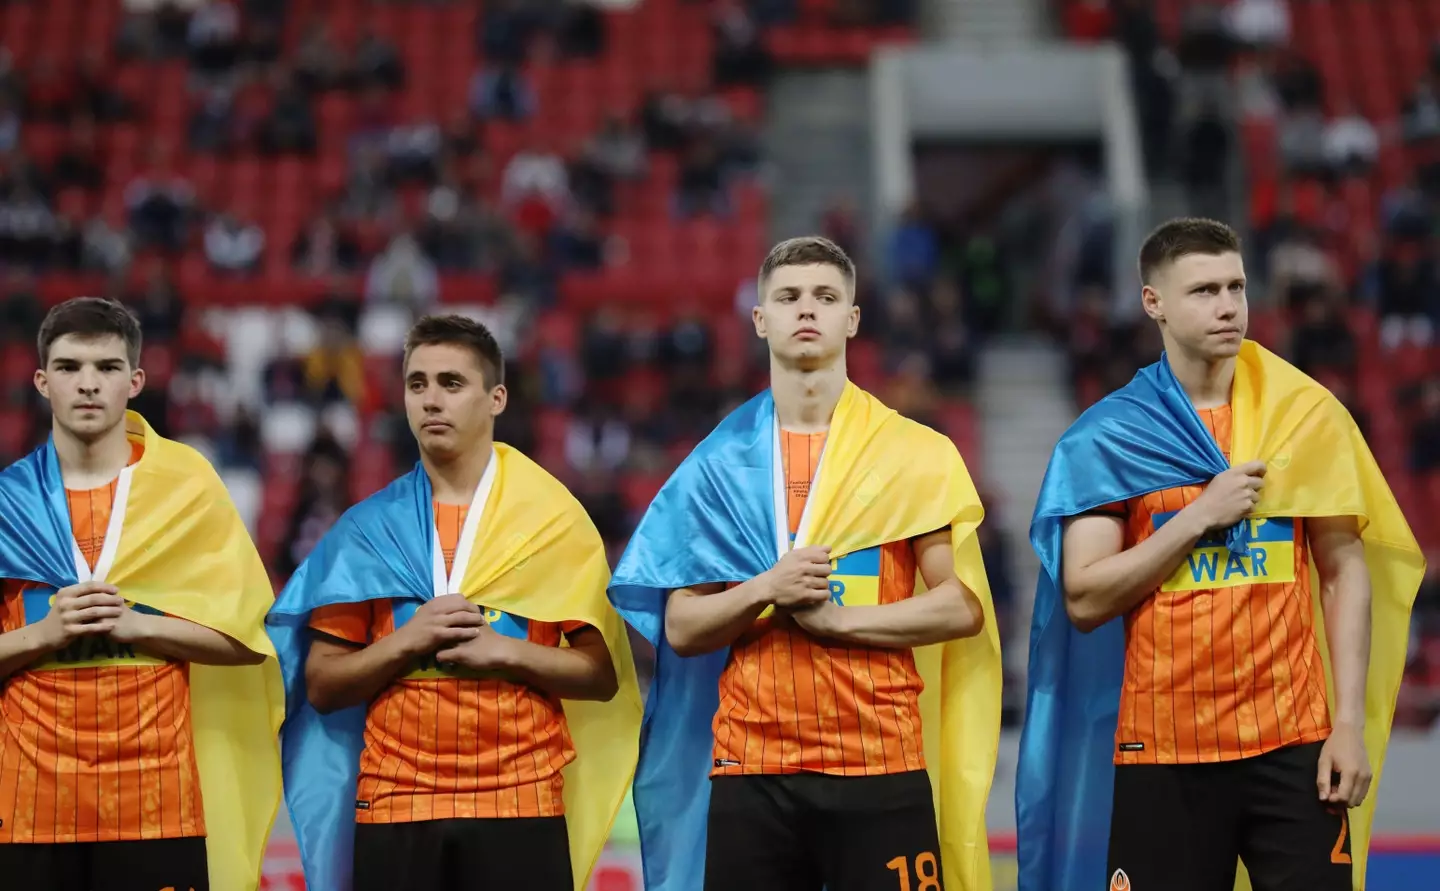 The match was part of the Shakhtar Global Tour for Peace (Image: PA)